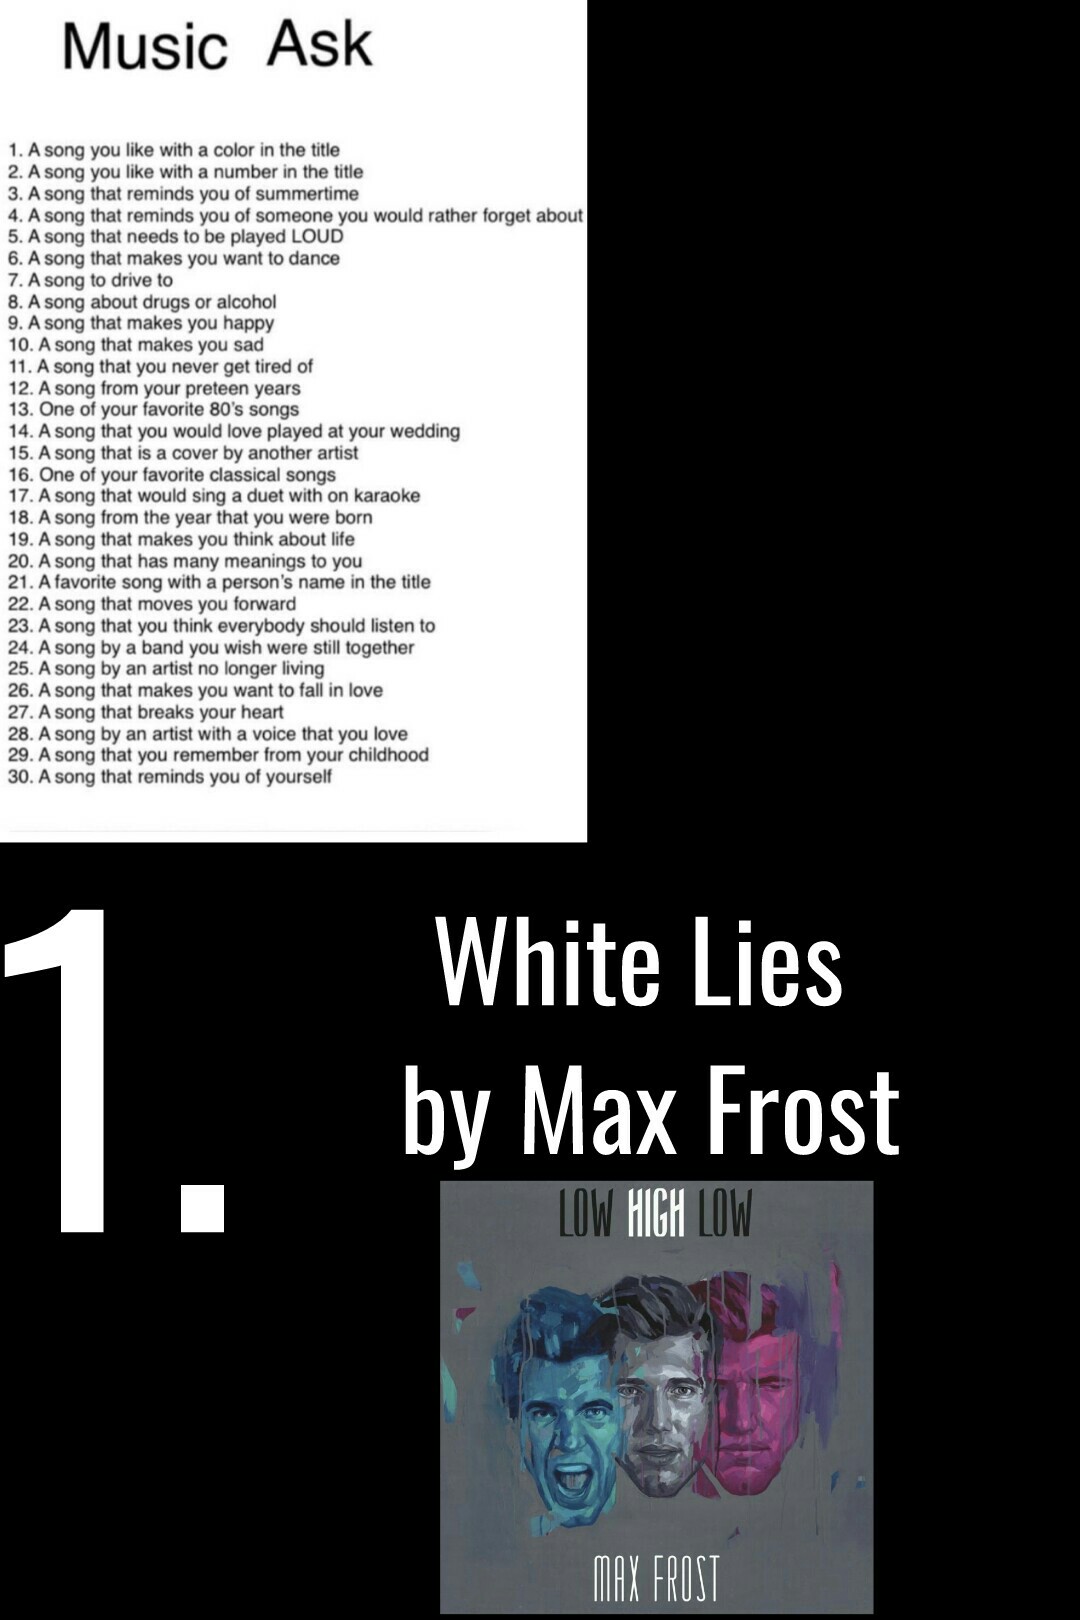 1. White Lies by Max Frost